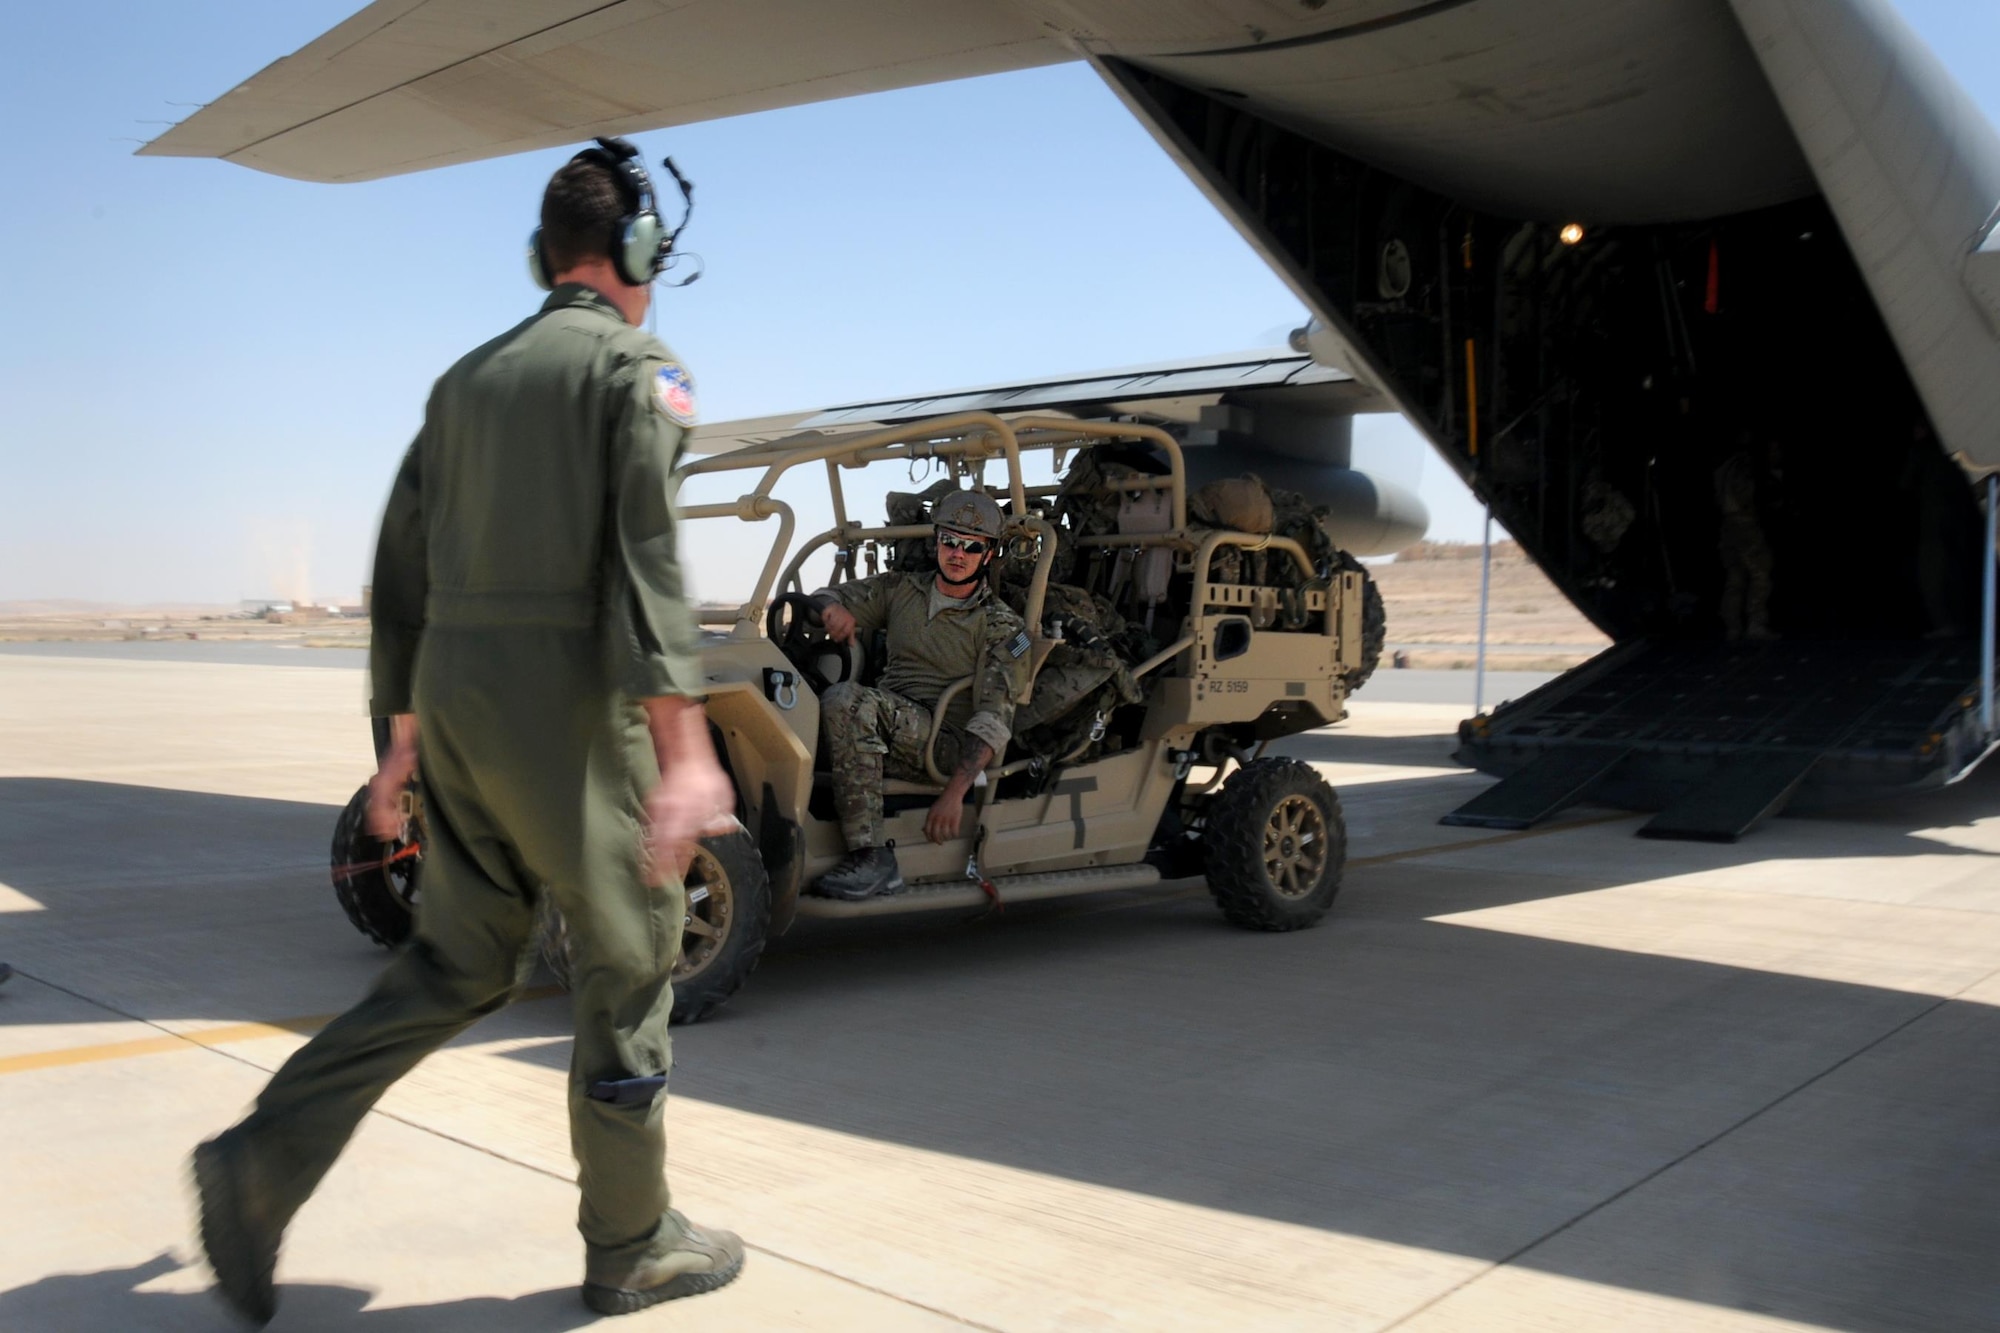 Senior Airman Dylan Gann, 700th Airlift Squadron loadmaster, directs a Special Tactics Airman and his tactical vehicle into the back of a 94th Airlift Wing C-130 during Exercise Eager Lion in Jordan, 20 May, 2016. Special Tactics Airmen, the Air Force’s ground special operations force, use vehicles like this to establish air fields after jumping to infiltrate hostile or austere territory. (U.S. Air Force photo/Staff Sgt. Alan Abernethy)
